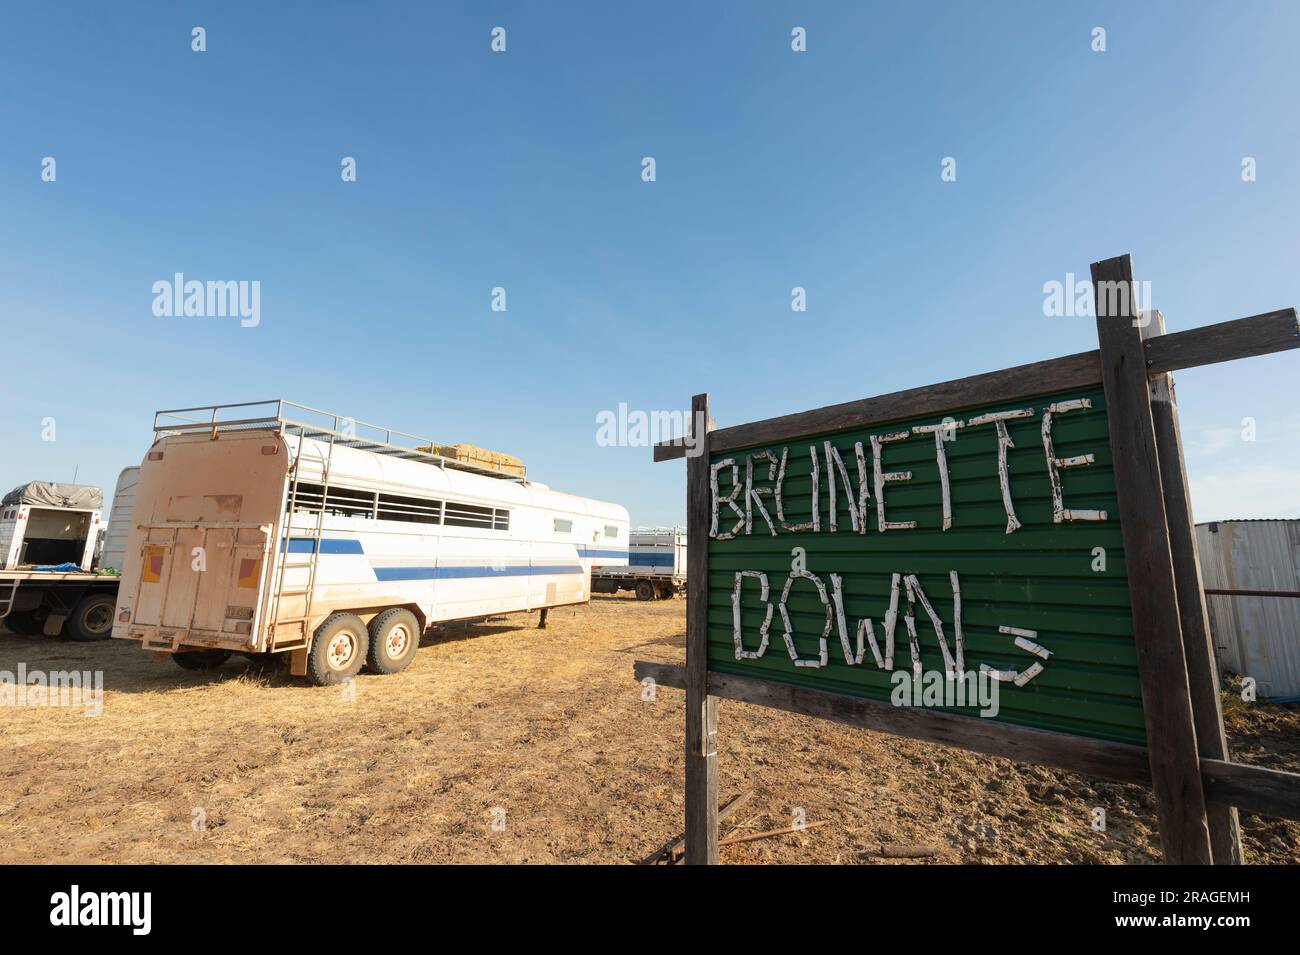 Sign for Brunette Downs in front of a horse float, Brunette Downs Cattle Station, Northern Territory, NT, Australia Stock Photo